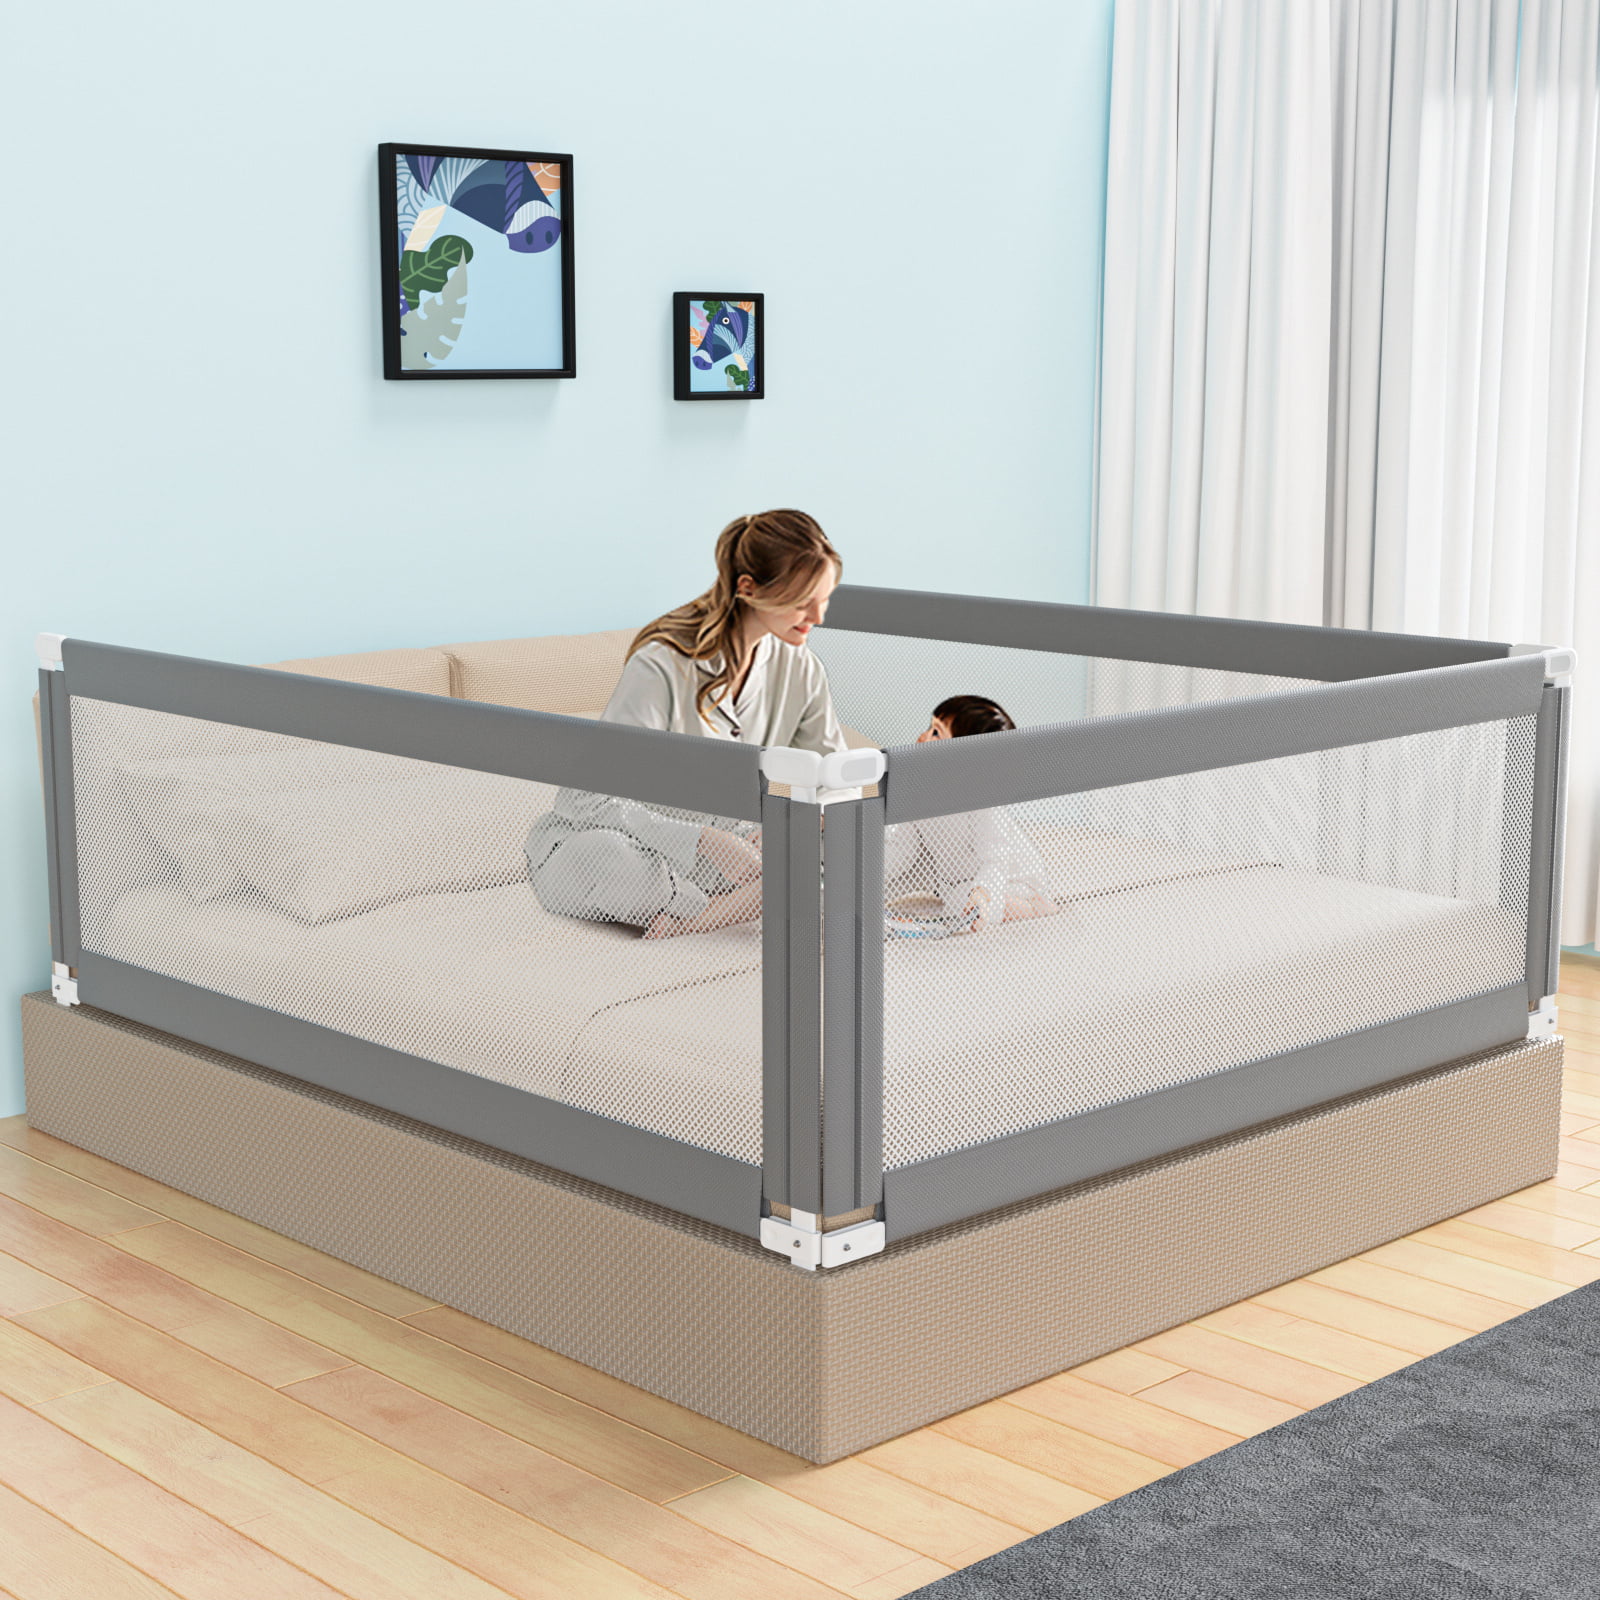 Bed Queen Size Long Rail Bumper For Adult Kids Crib Guard Safety New 